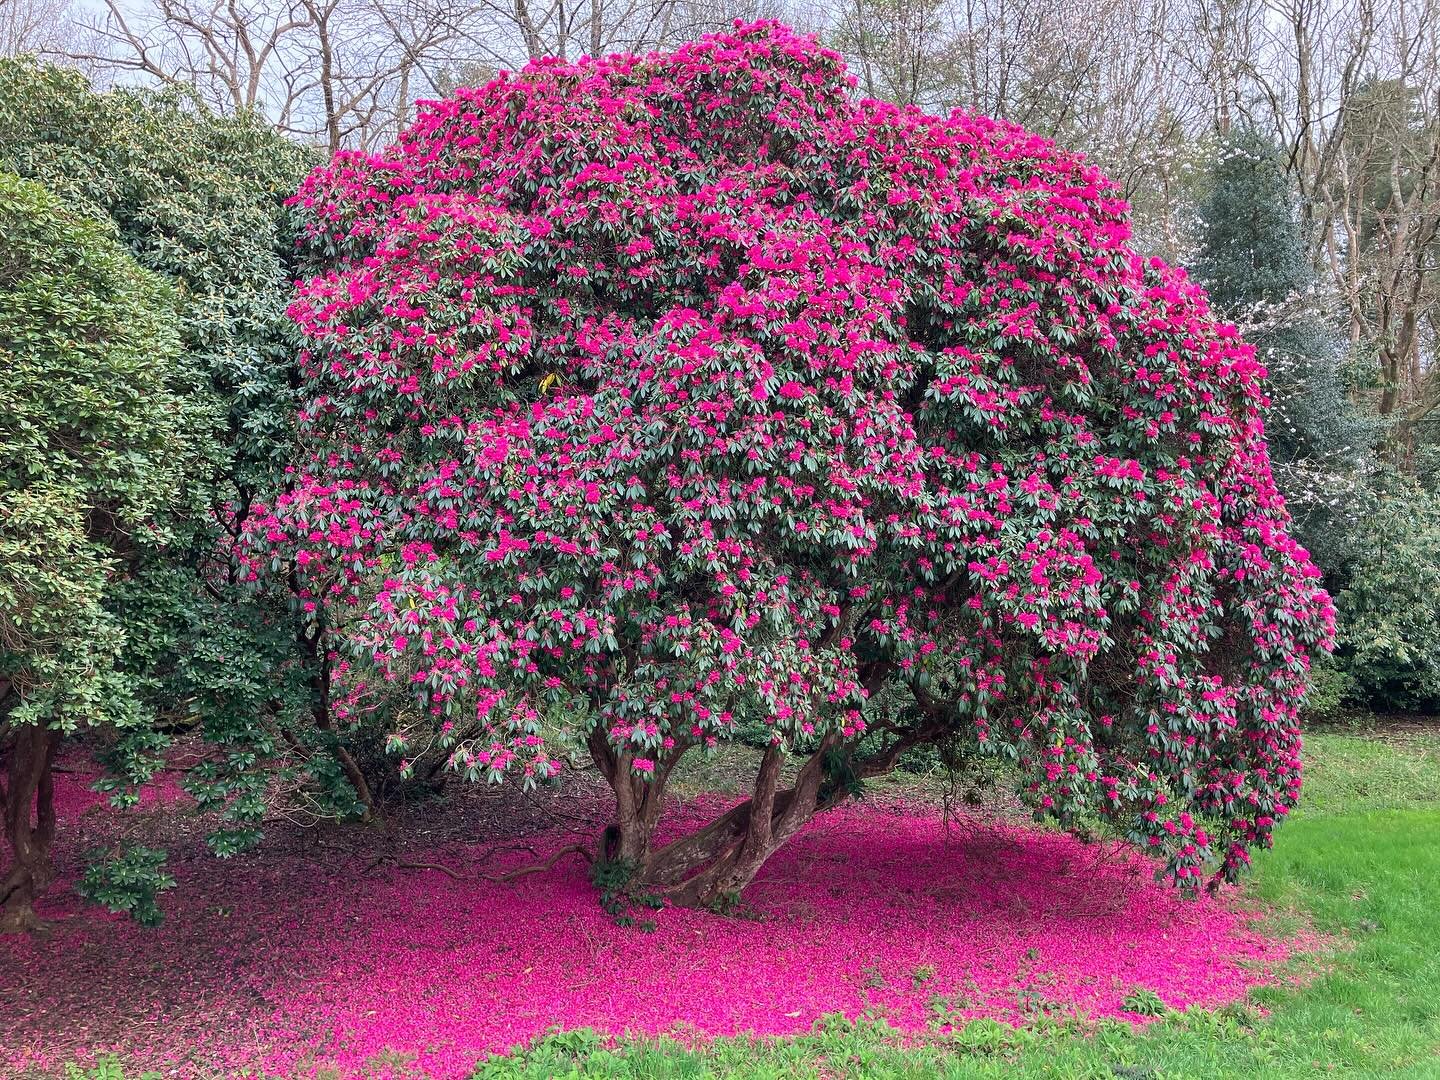 Look at these pink carpets of Rhododendron petals blown off by the strong winds over the weekend!